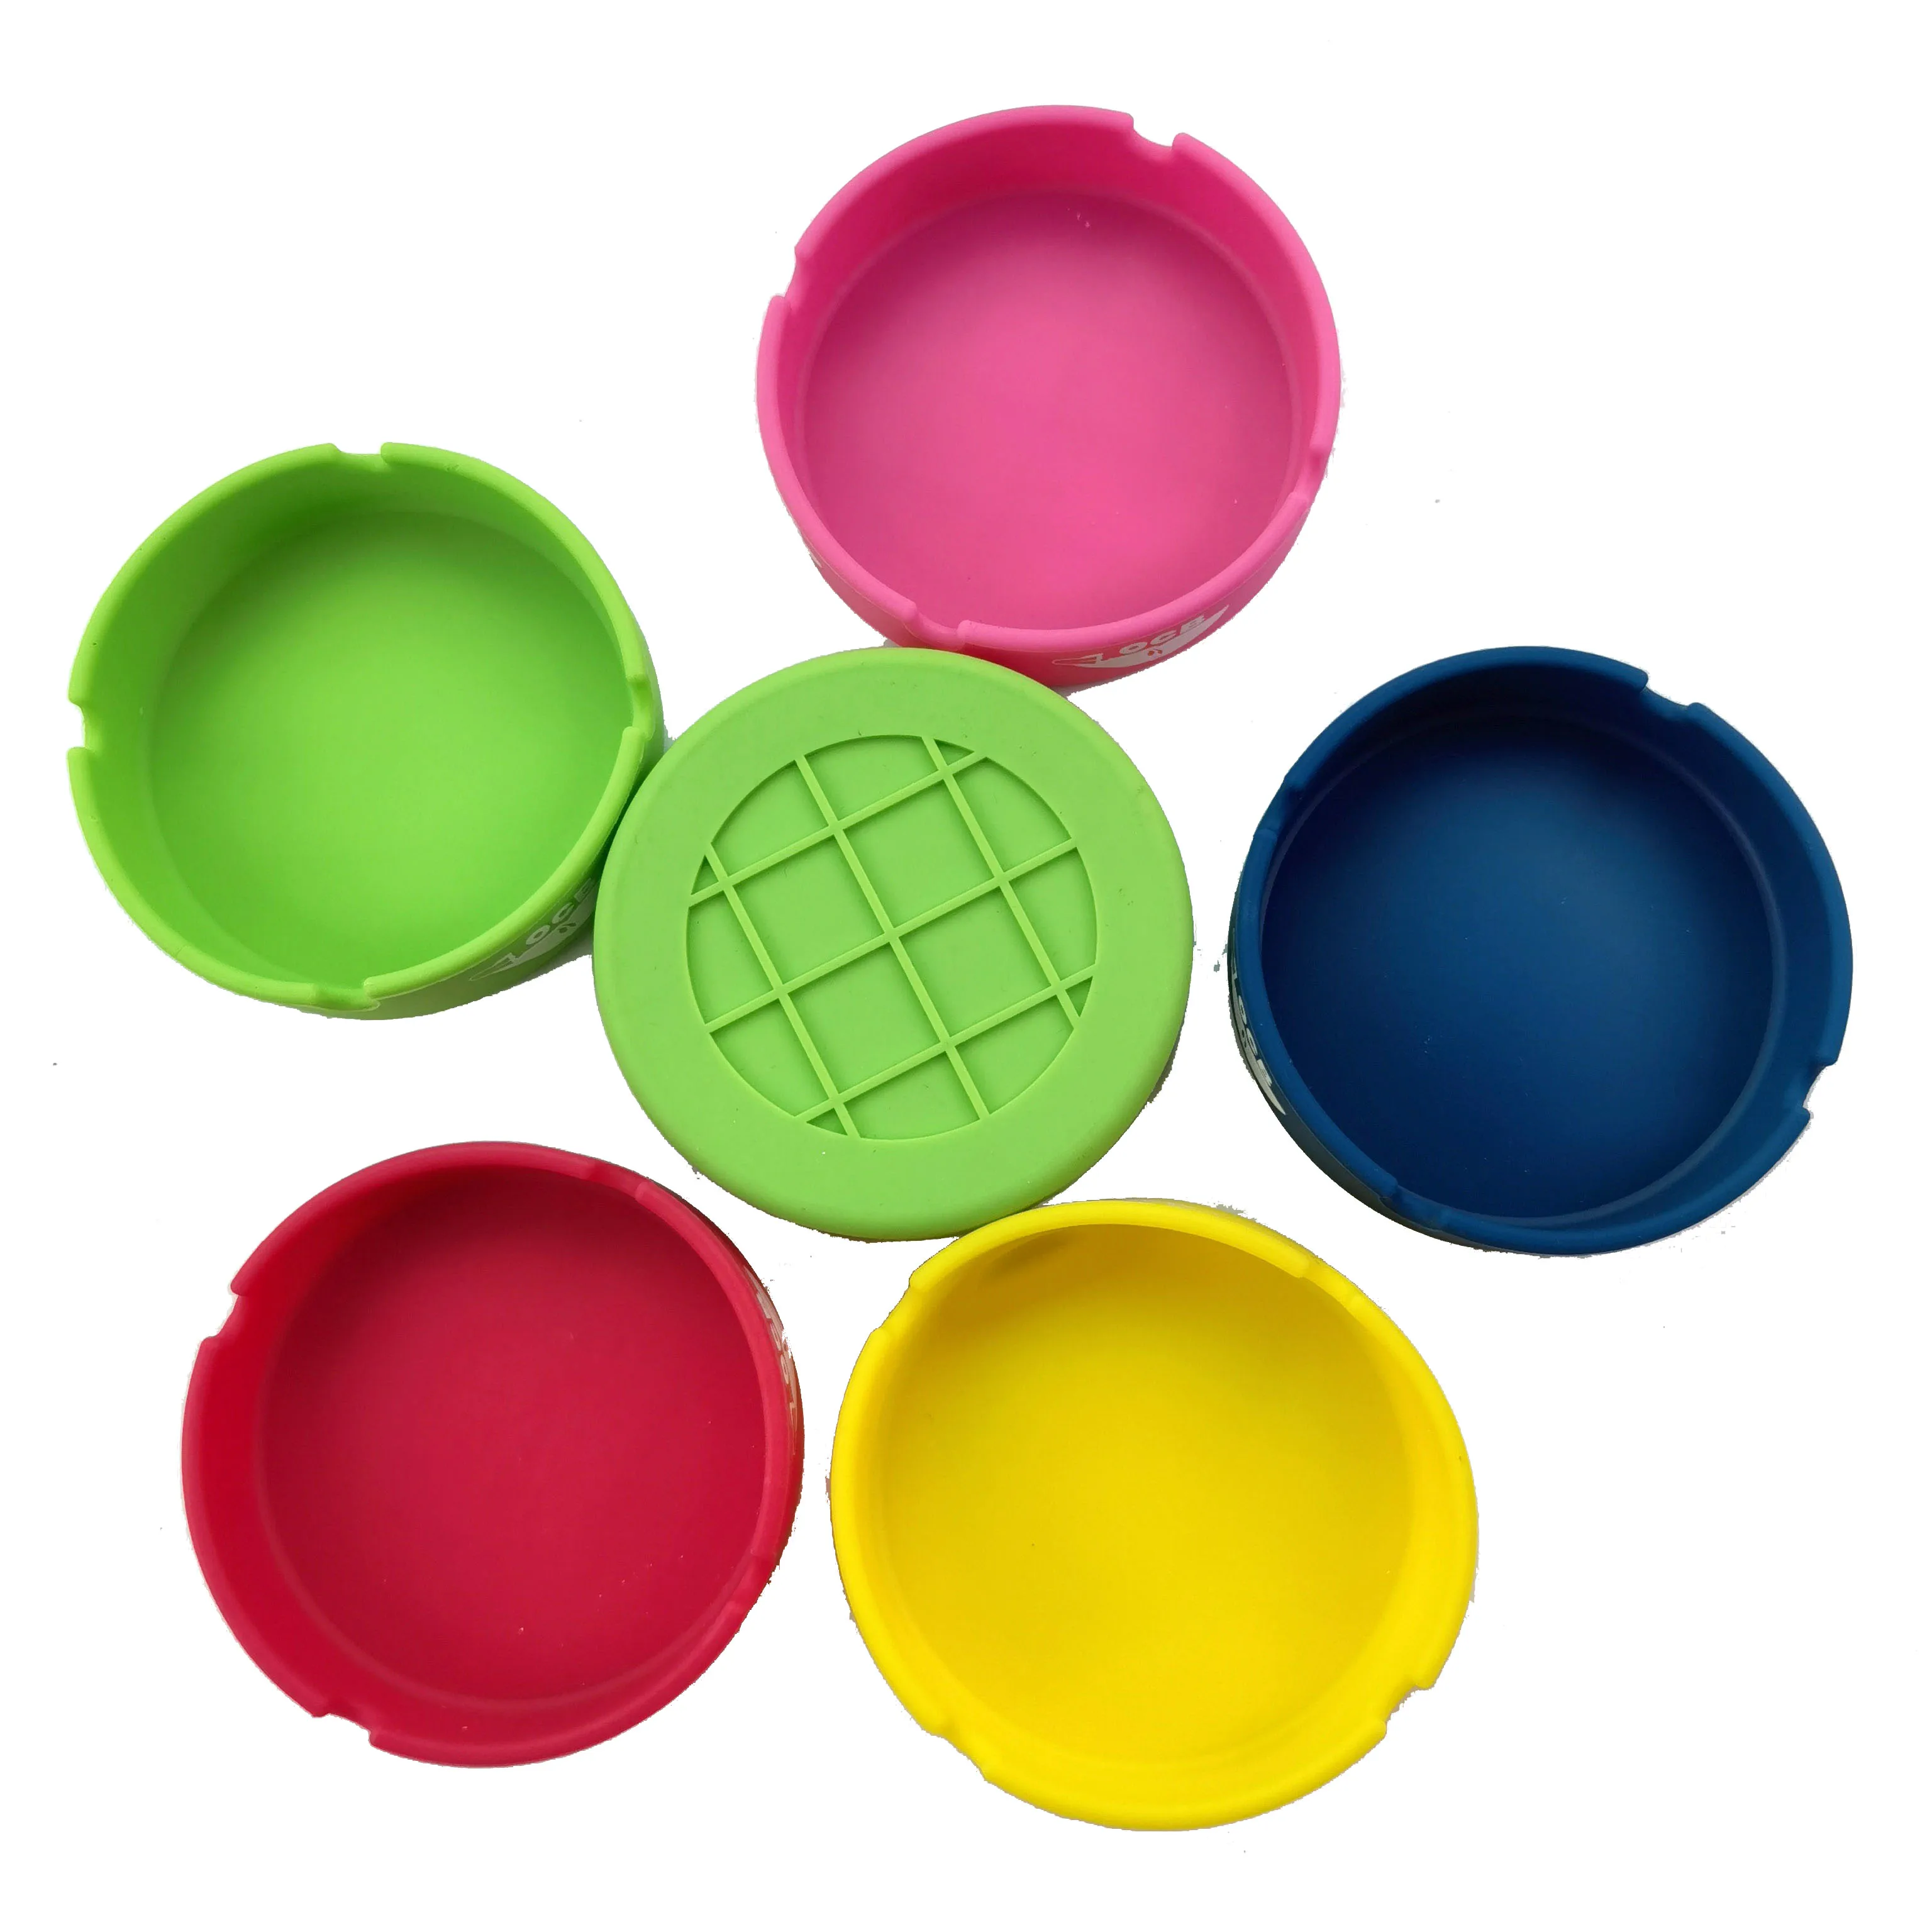 

cigar ash tray food safe Cigarette Holder Soft Round Portable Pockets Silicone Ashtray, Green/yellow/red/pink/blue